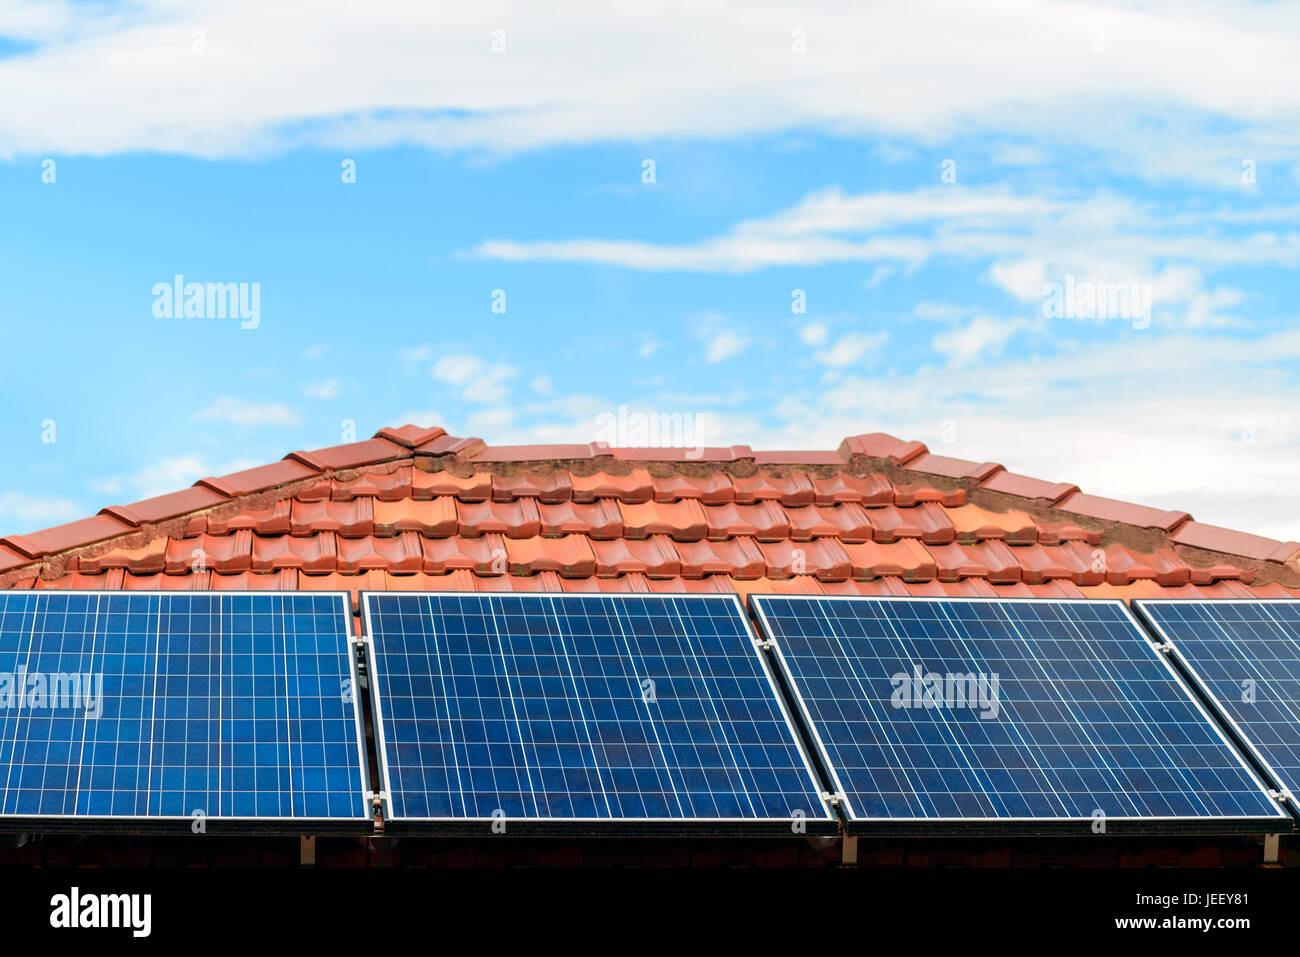 Solar panels installed on the house roof in one of the Melbourne suburbs, Victoria, Australia Stock Photo